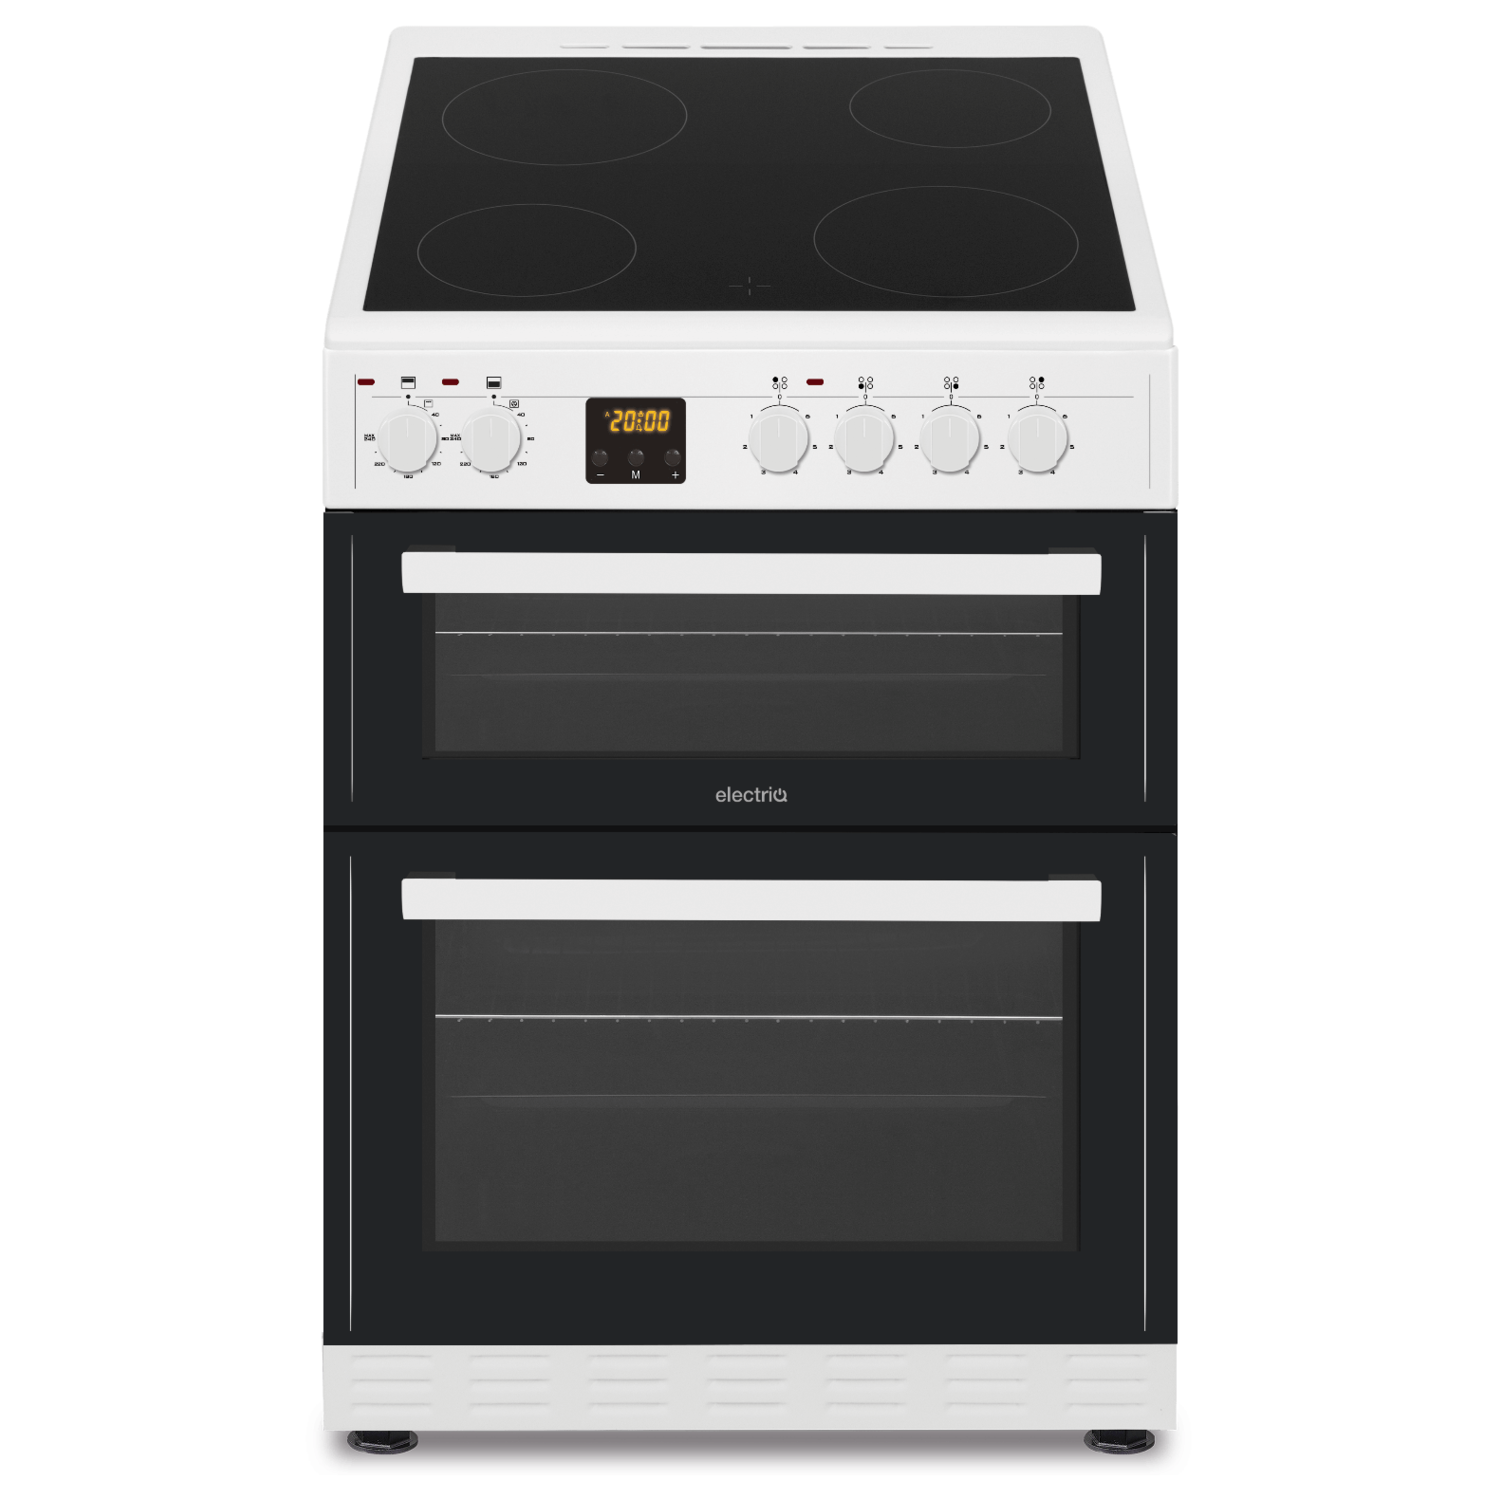 electriQ 60cm Double Cavity Electric Cooker with Ceramic Hob - White